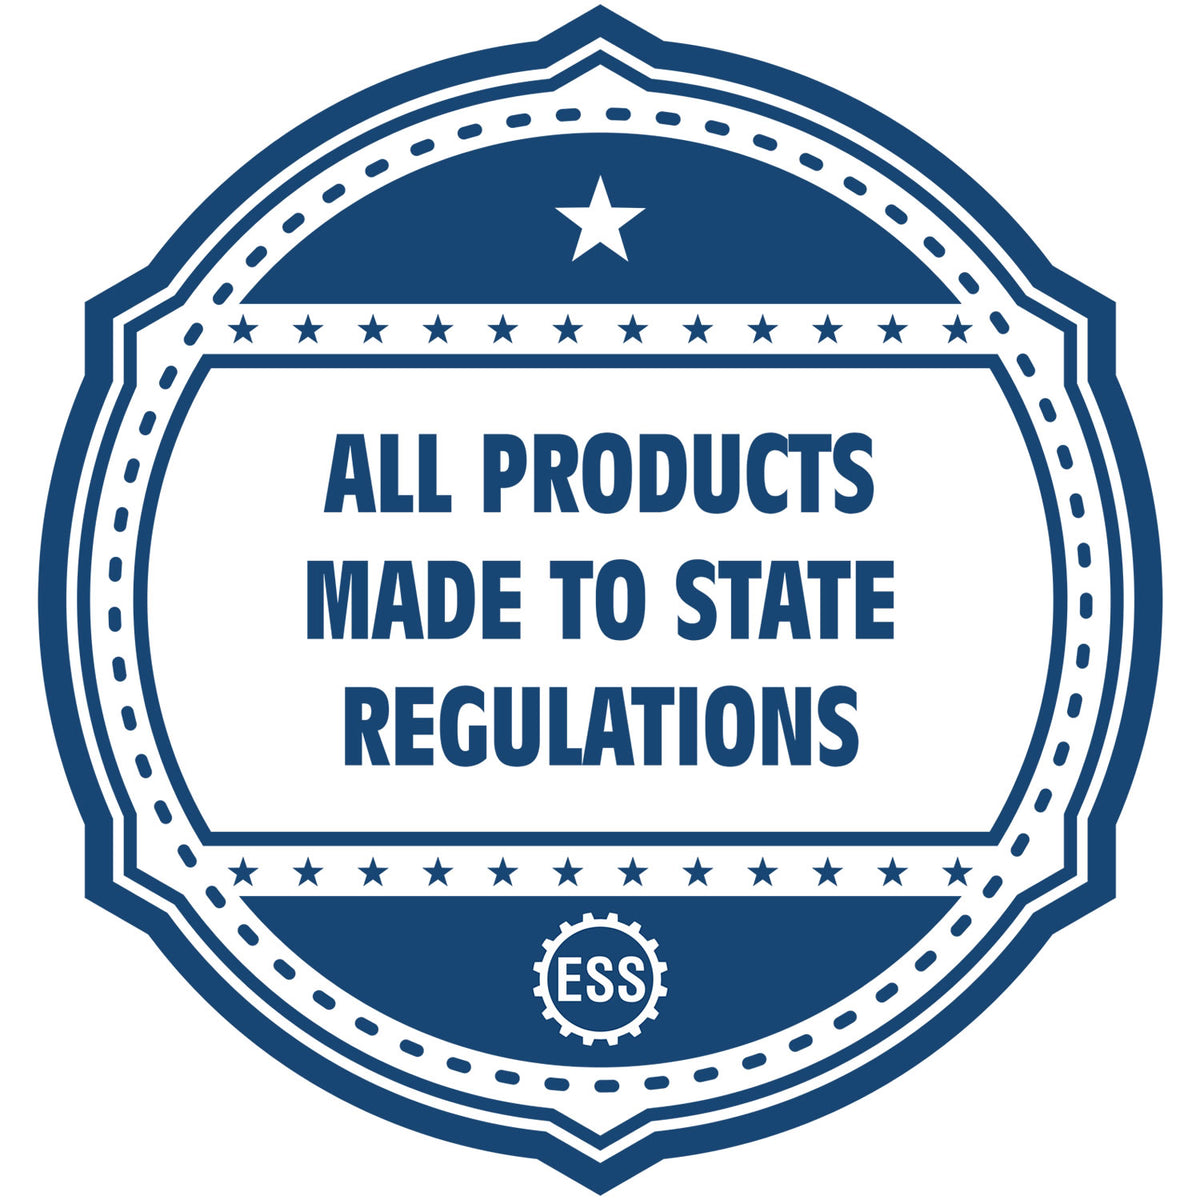 A blue icon or badge for the Slim Pre-Inked New Mexico Professional Geologist Seal Stamp showing that this product is made in compliance with state regulations.